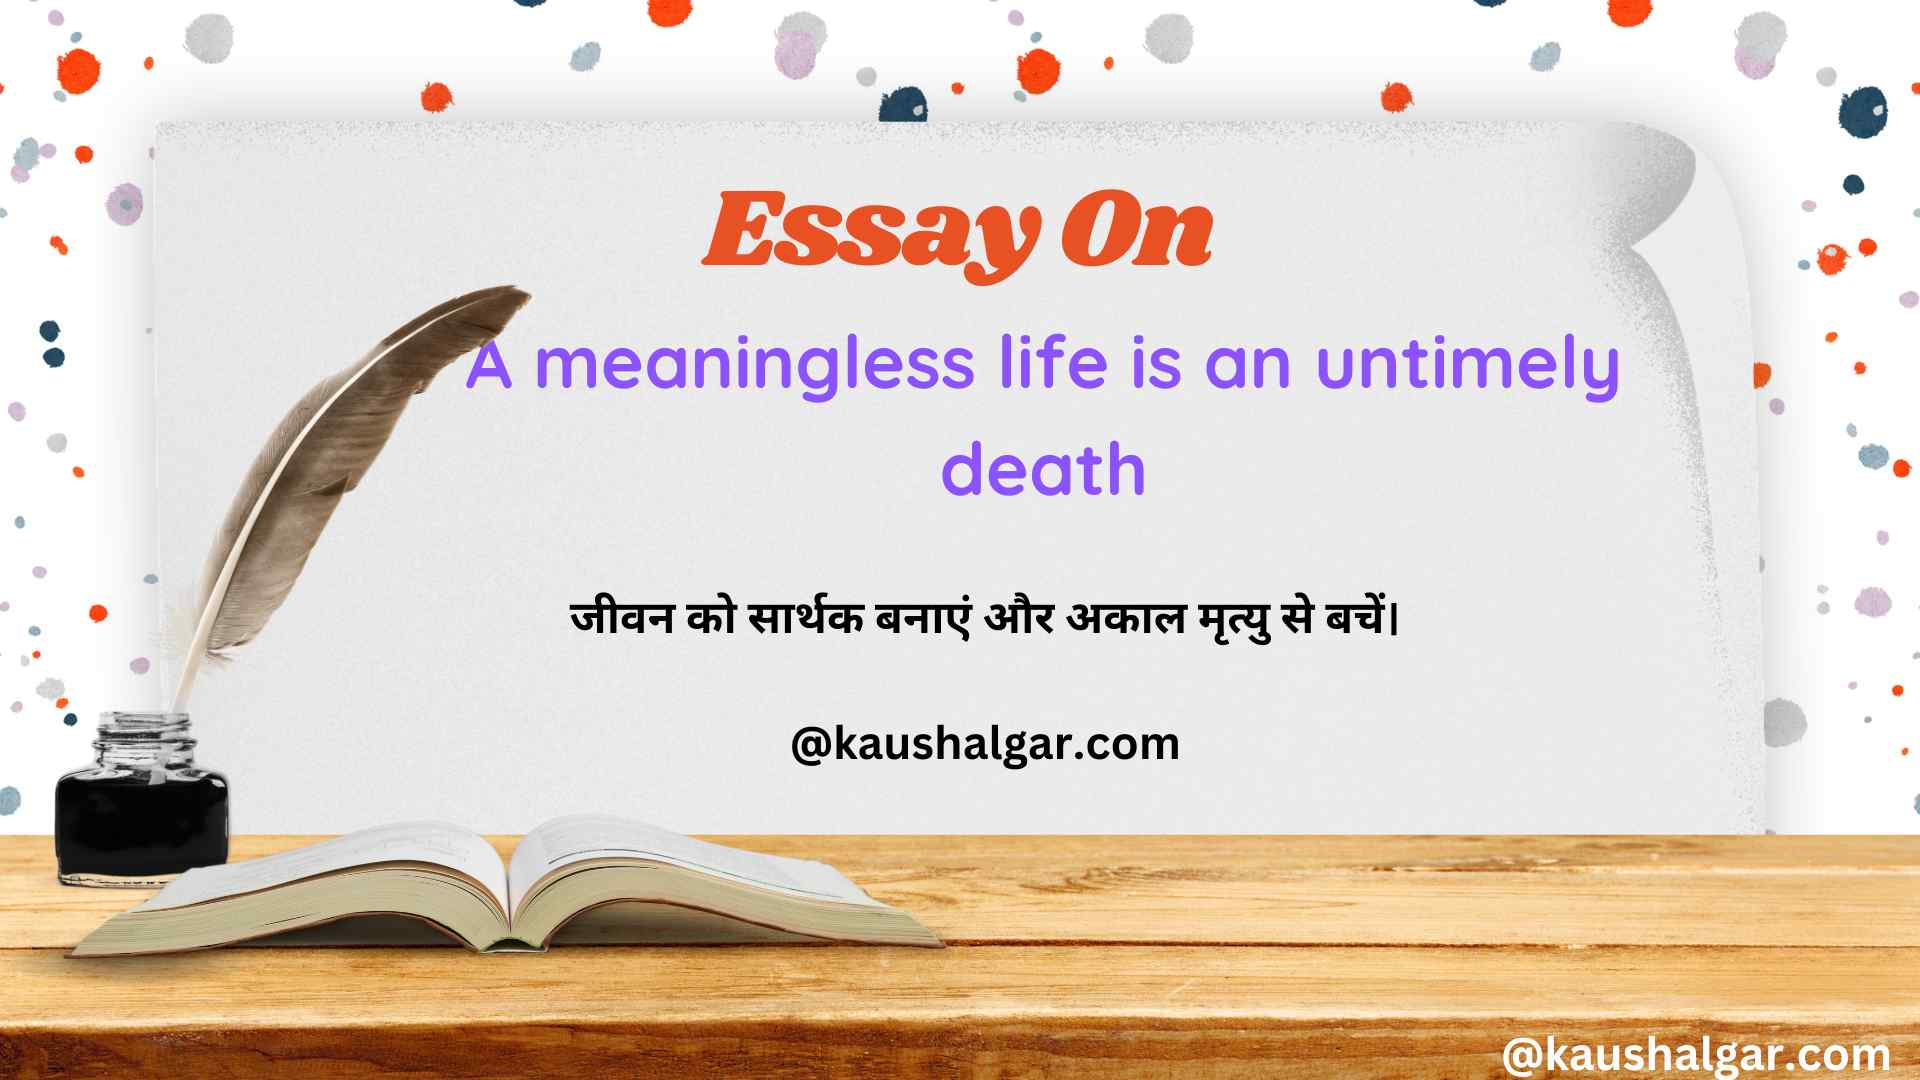 Meaningless life is an untimely death.